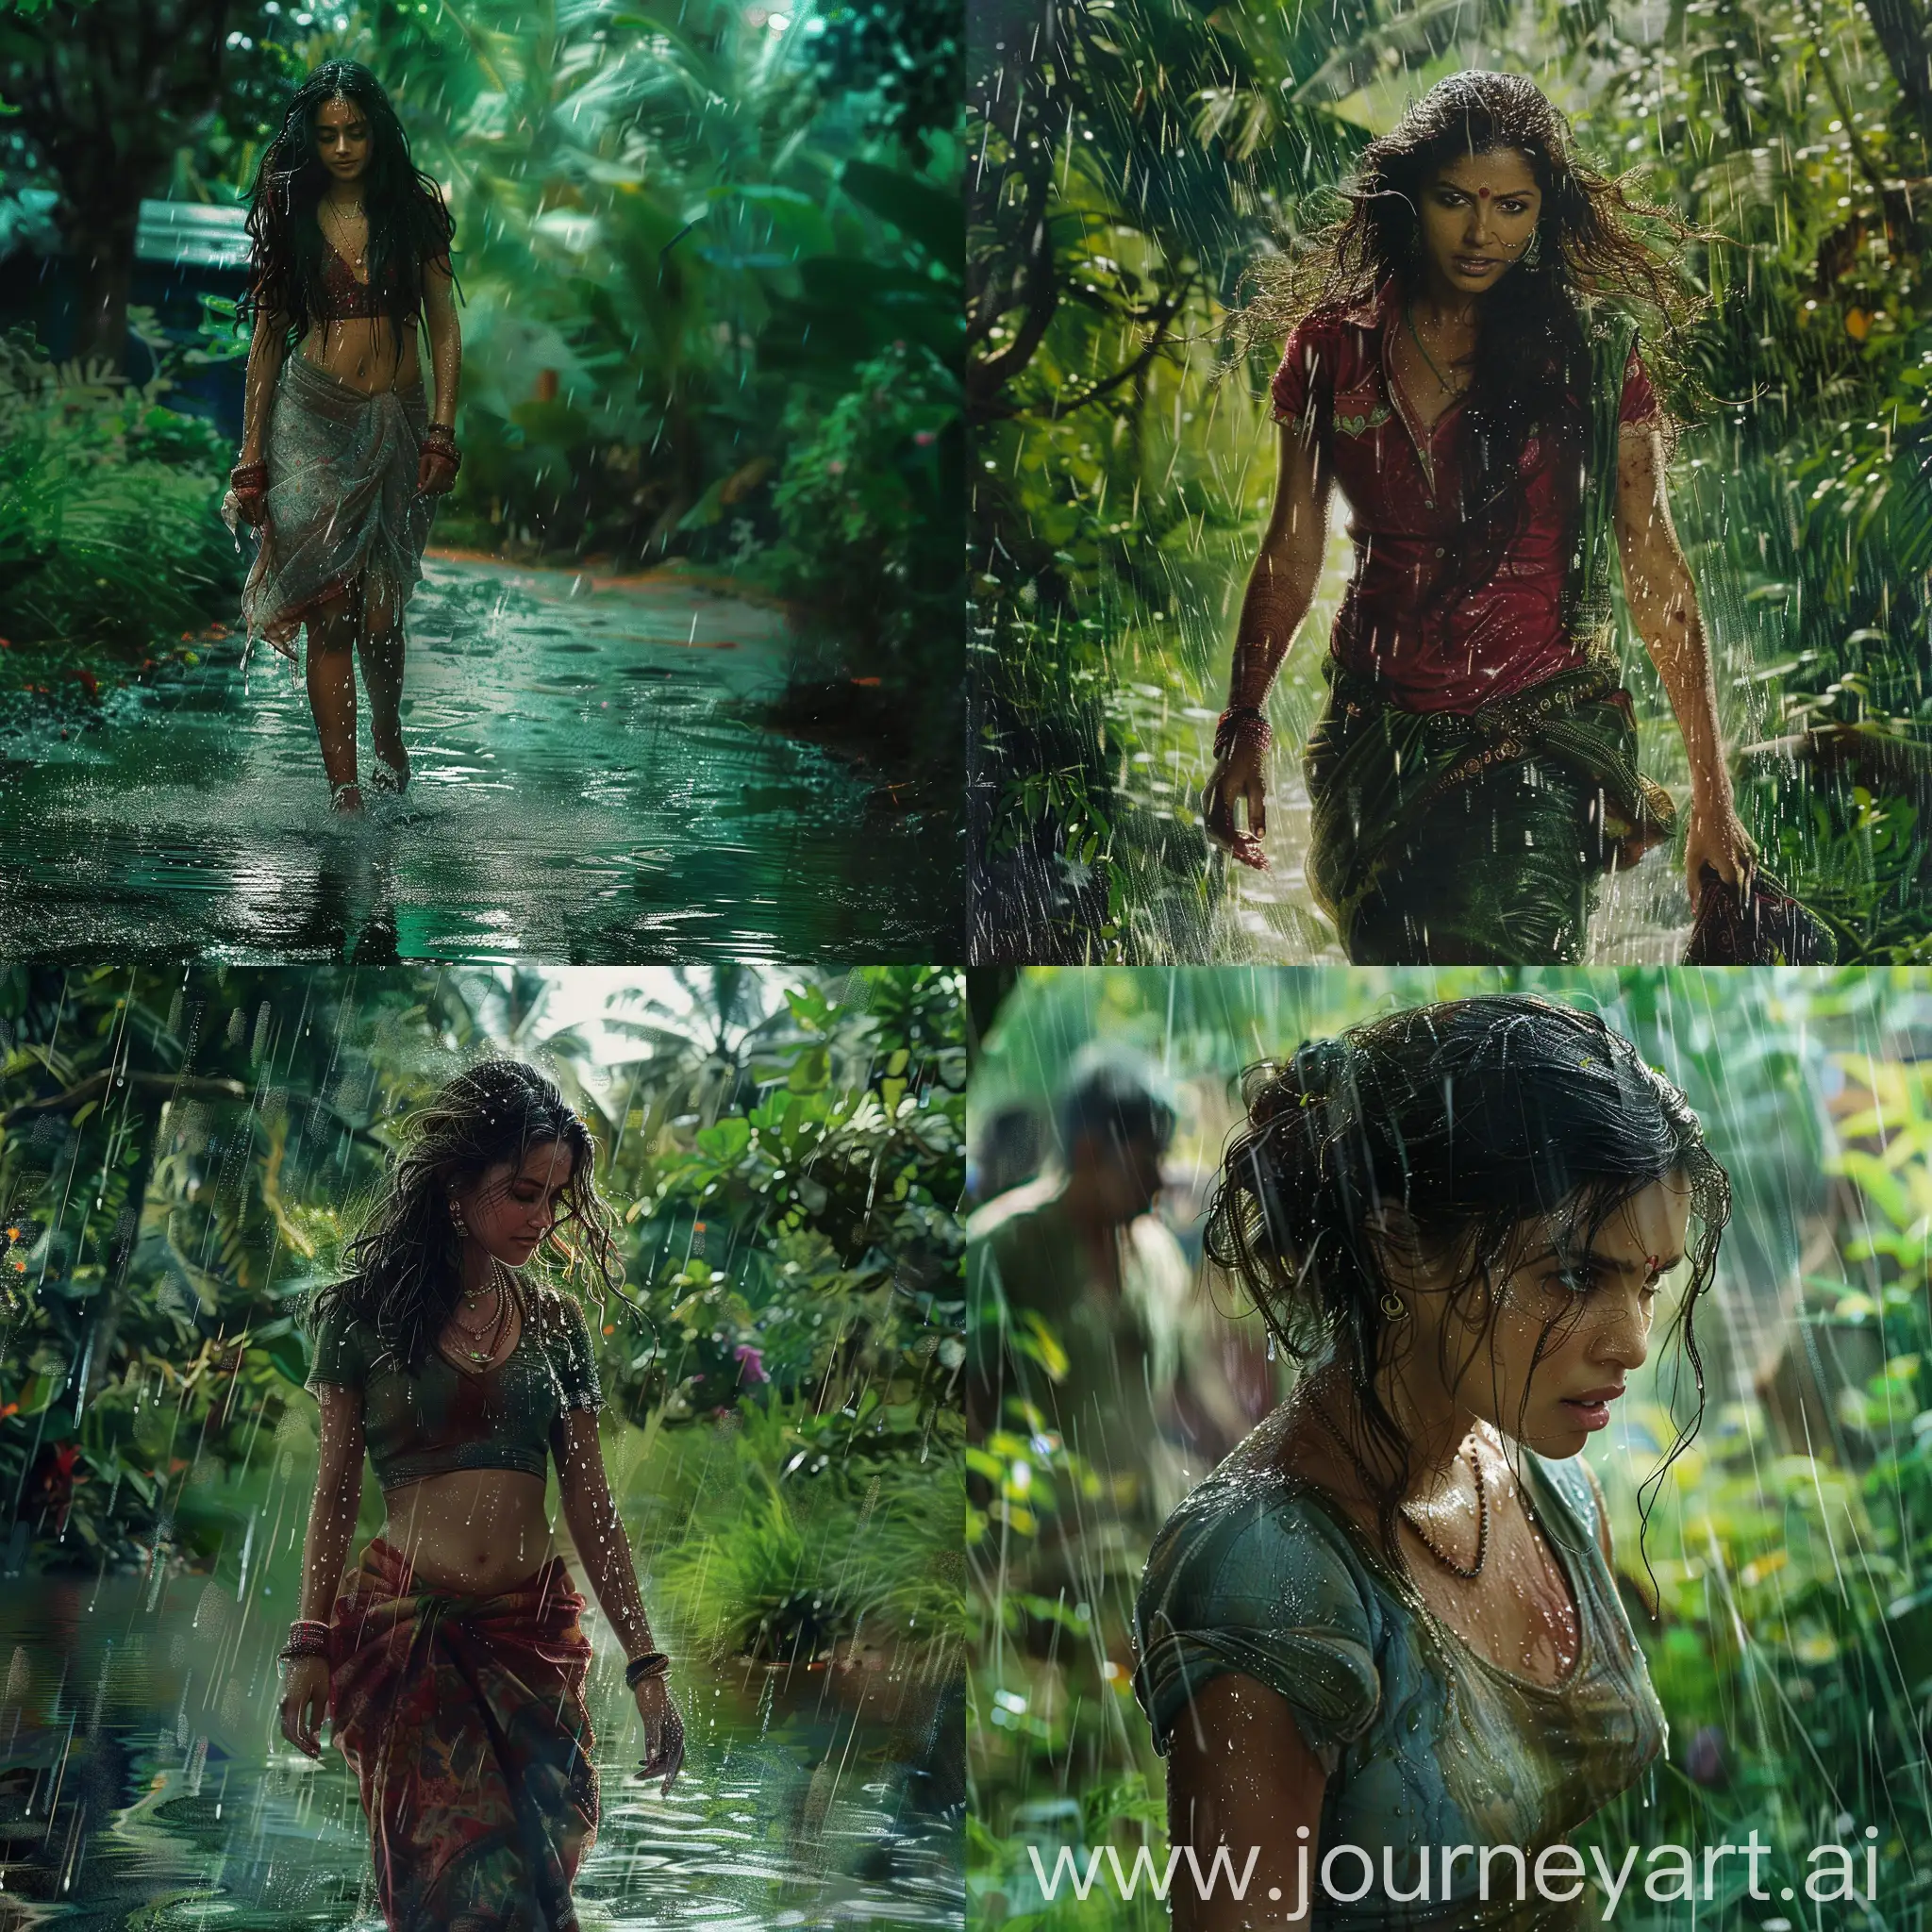 An Indian girl named Aishwarya, walking in the rain, all soaked in the rainwater, amdist a green jungle, beautiful facial features, curvy, alluring, depth in colors, depth in saturation.